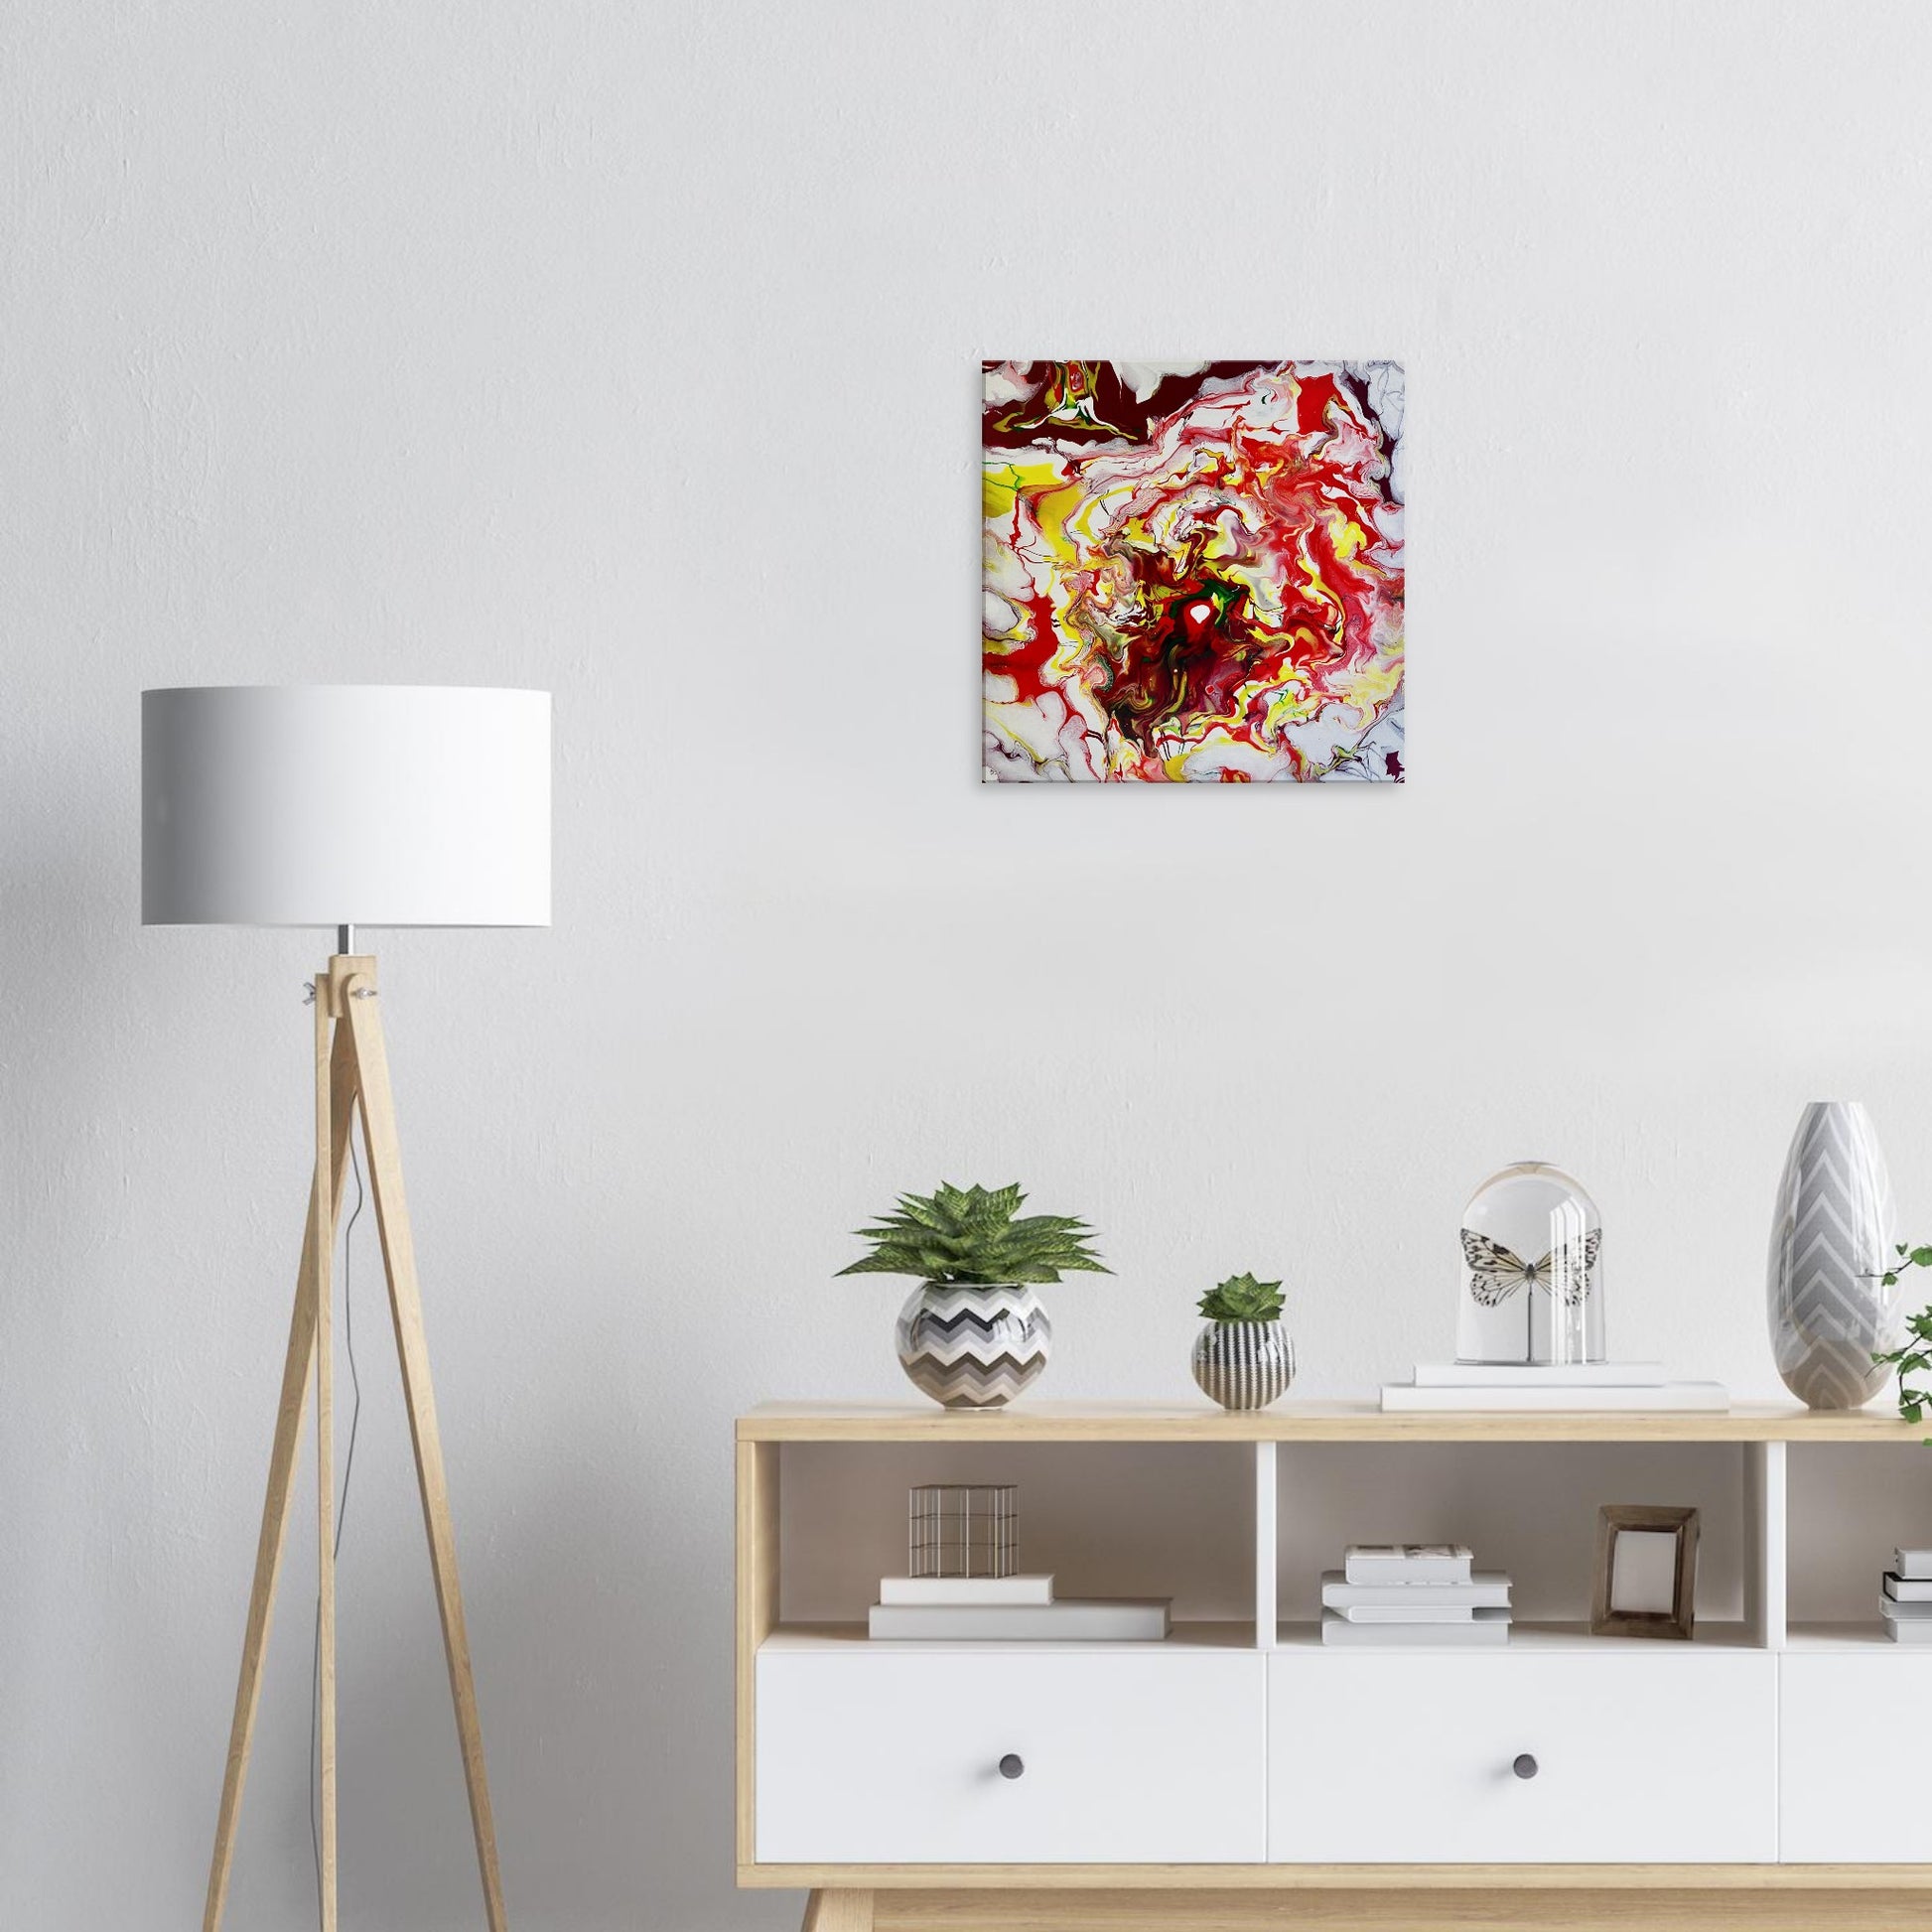 Abstract 'Bonfire' canvas print by Yana Virtuoso in a home setting, radiating warmth and energy with its bright, passionate colors.